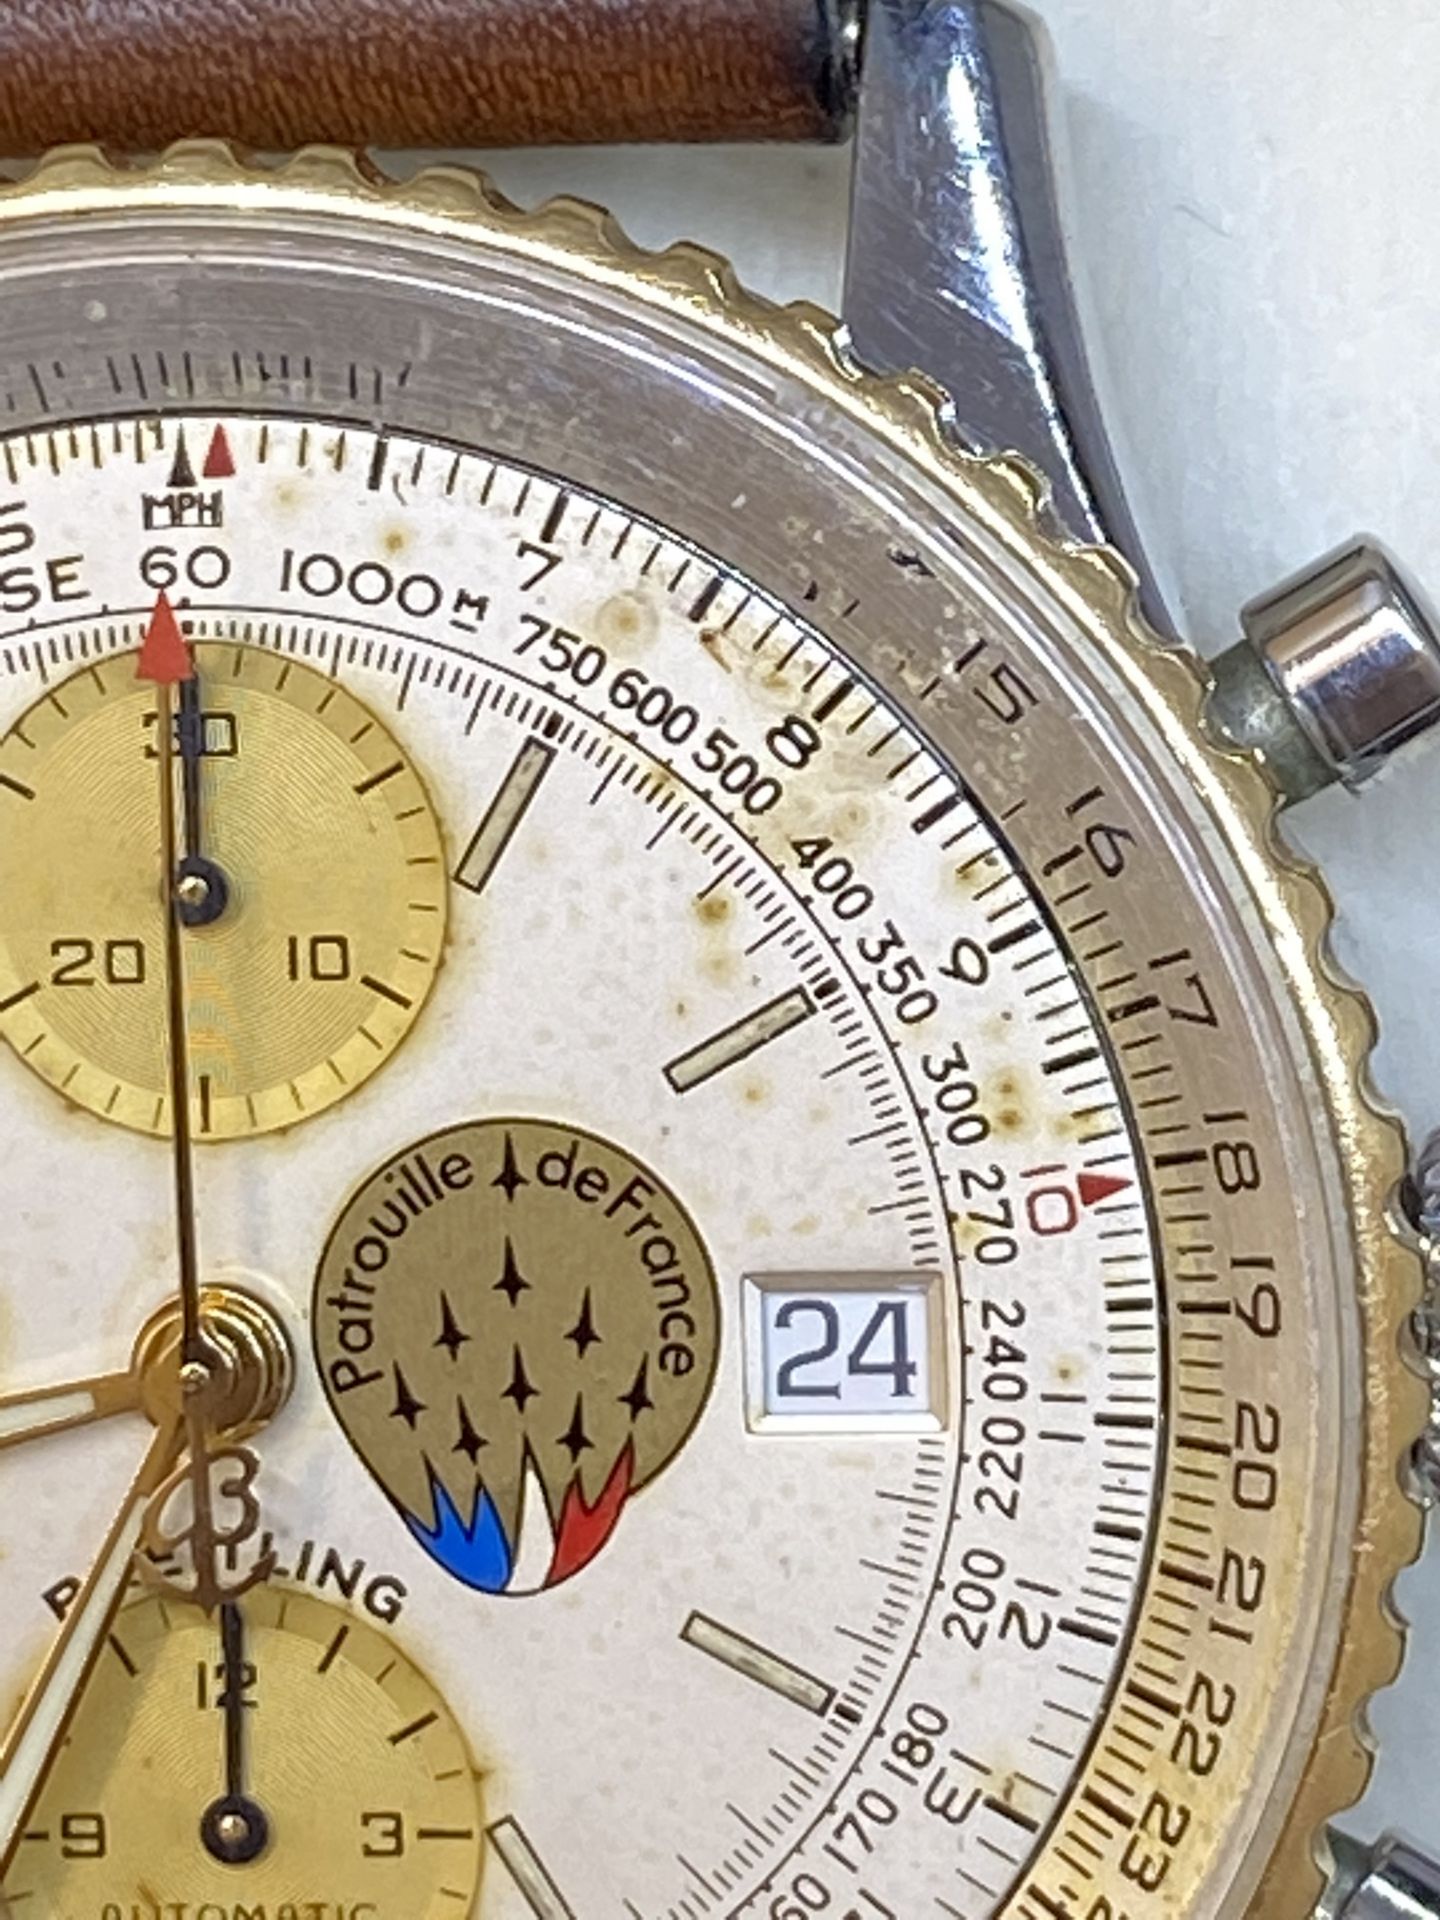 Breitling Navitimer Chronograph Watch with Box - Image 6 of 14